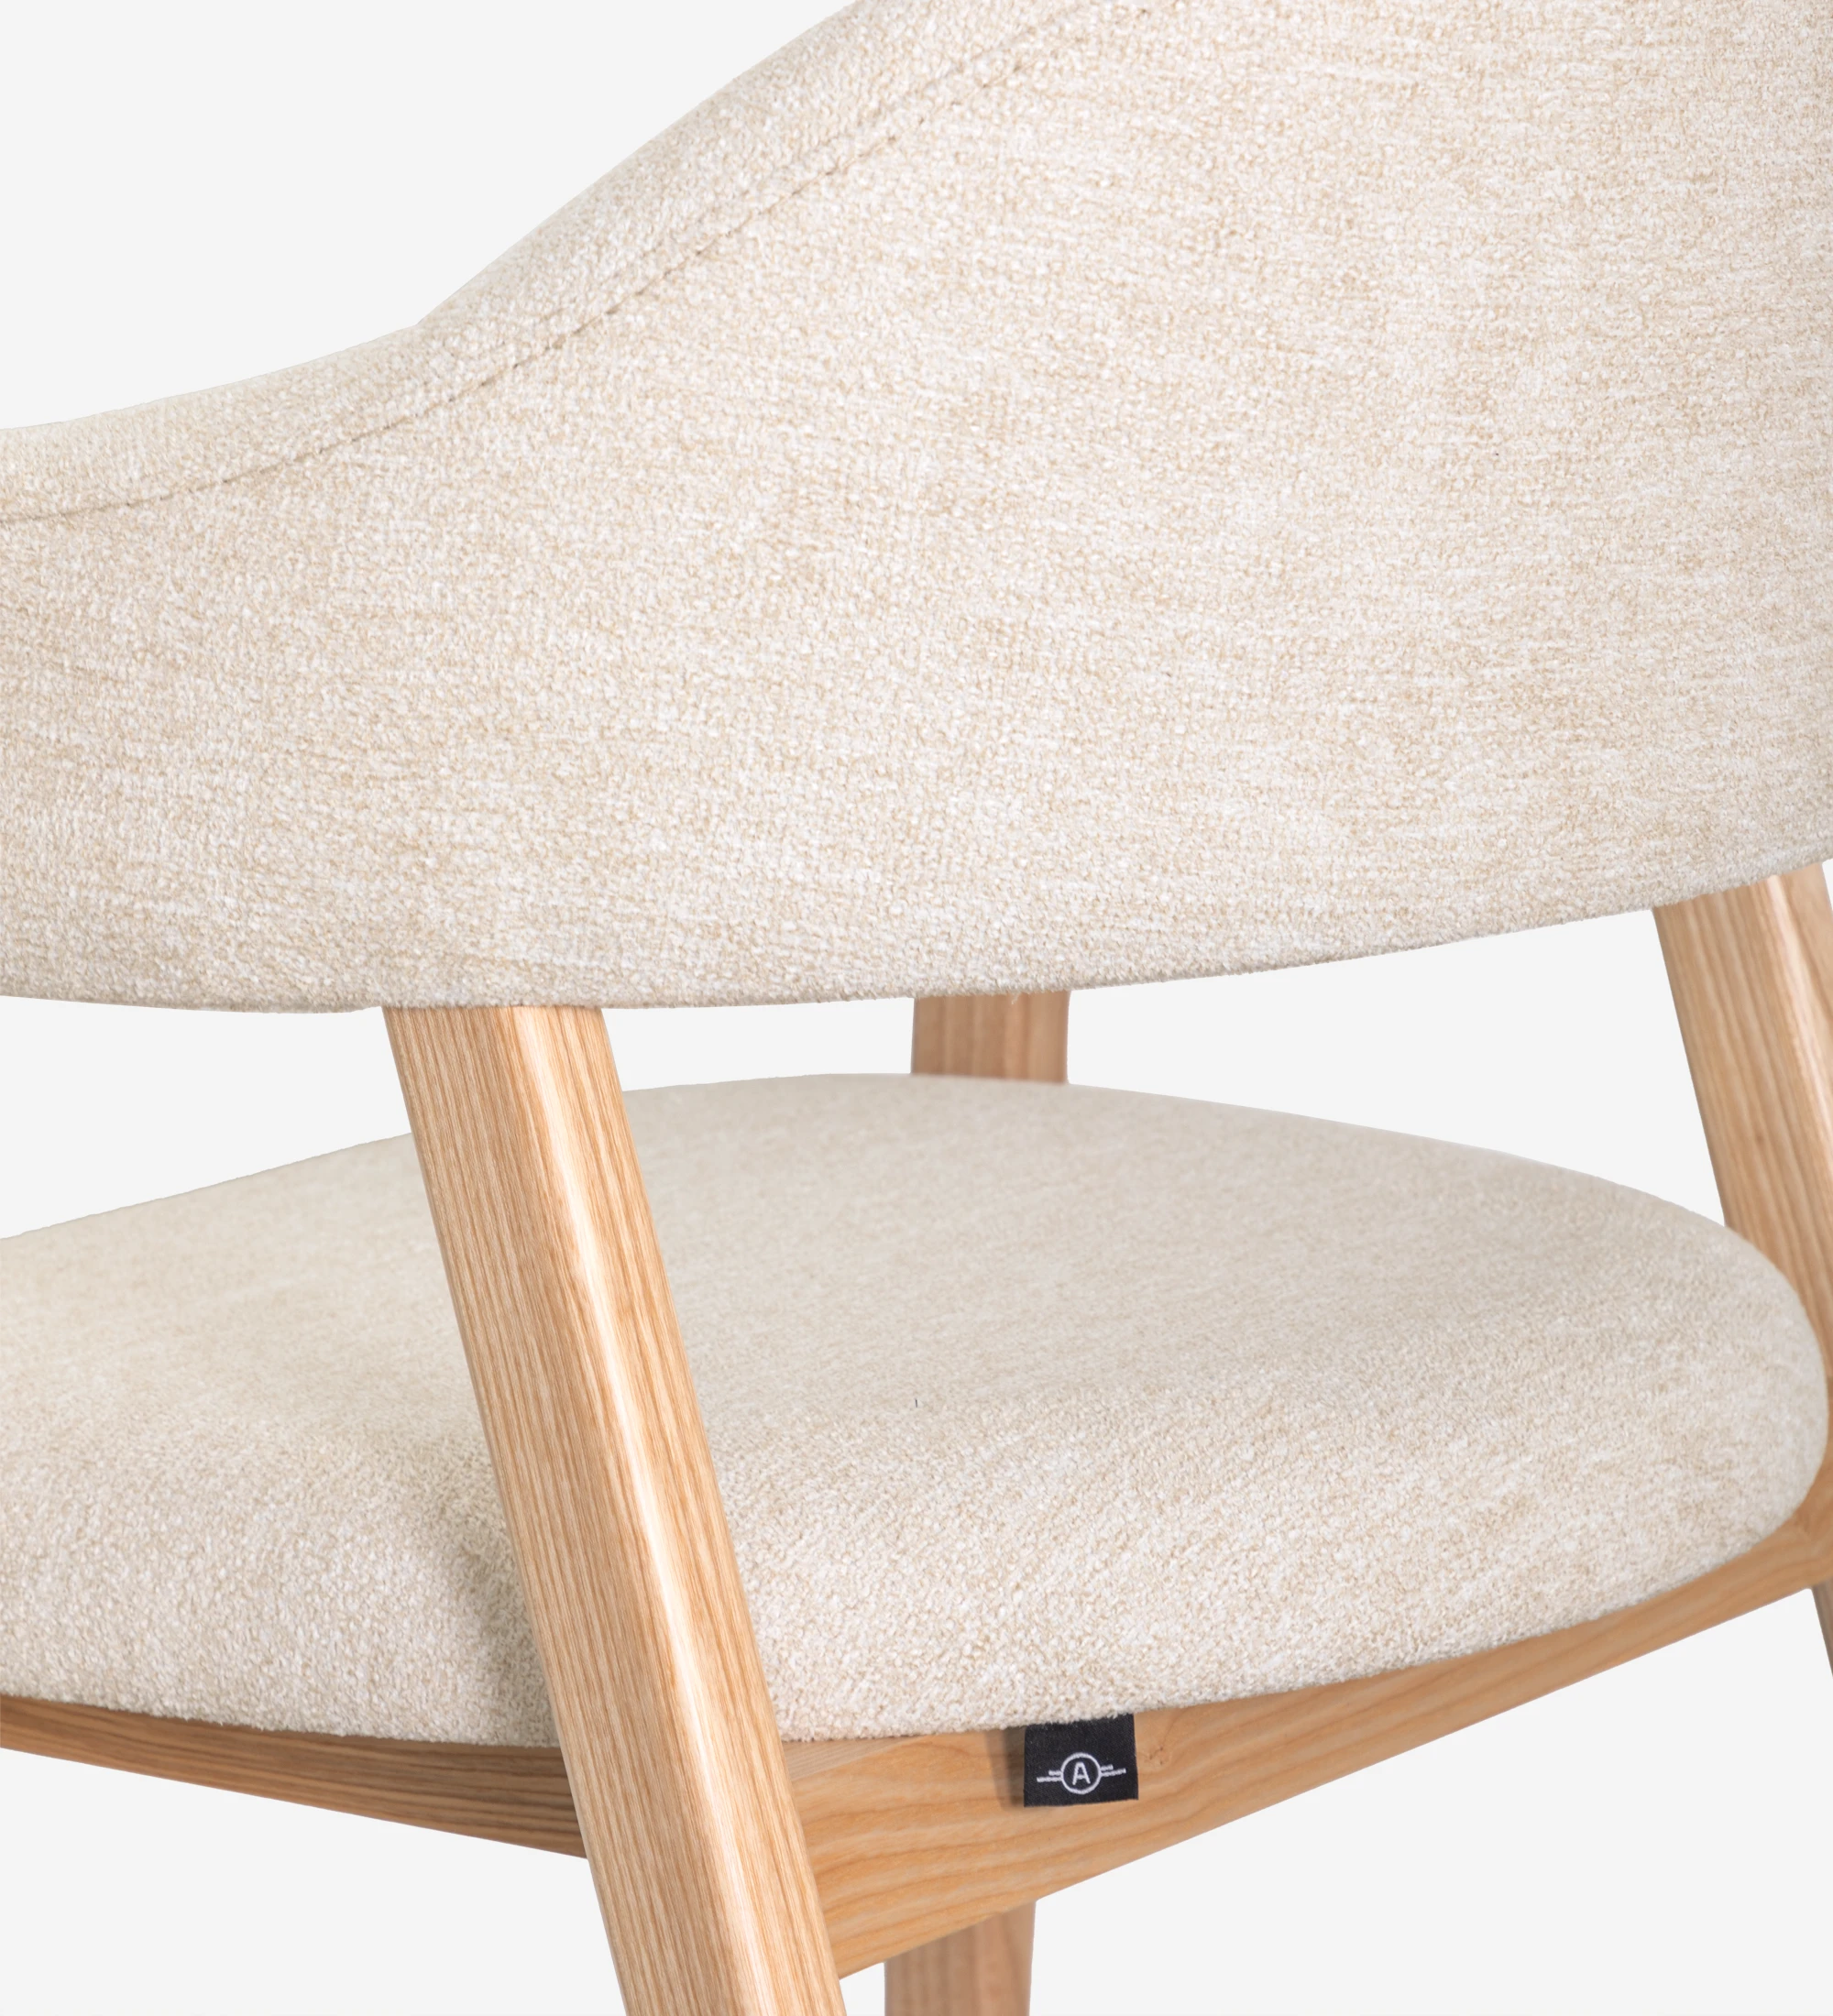 Chair with armrests, in natural ash wood, with seat and back upholstered in fabric